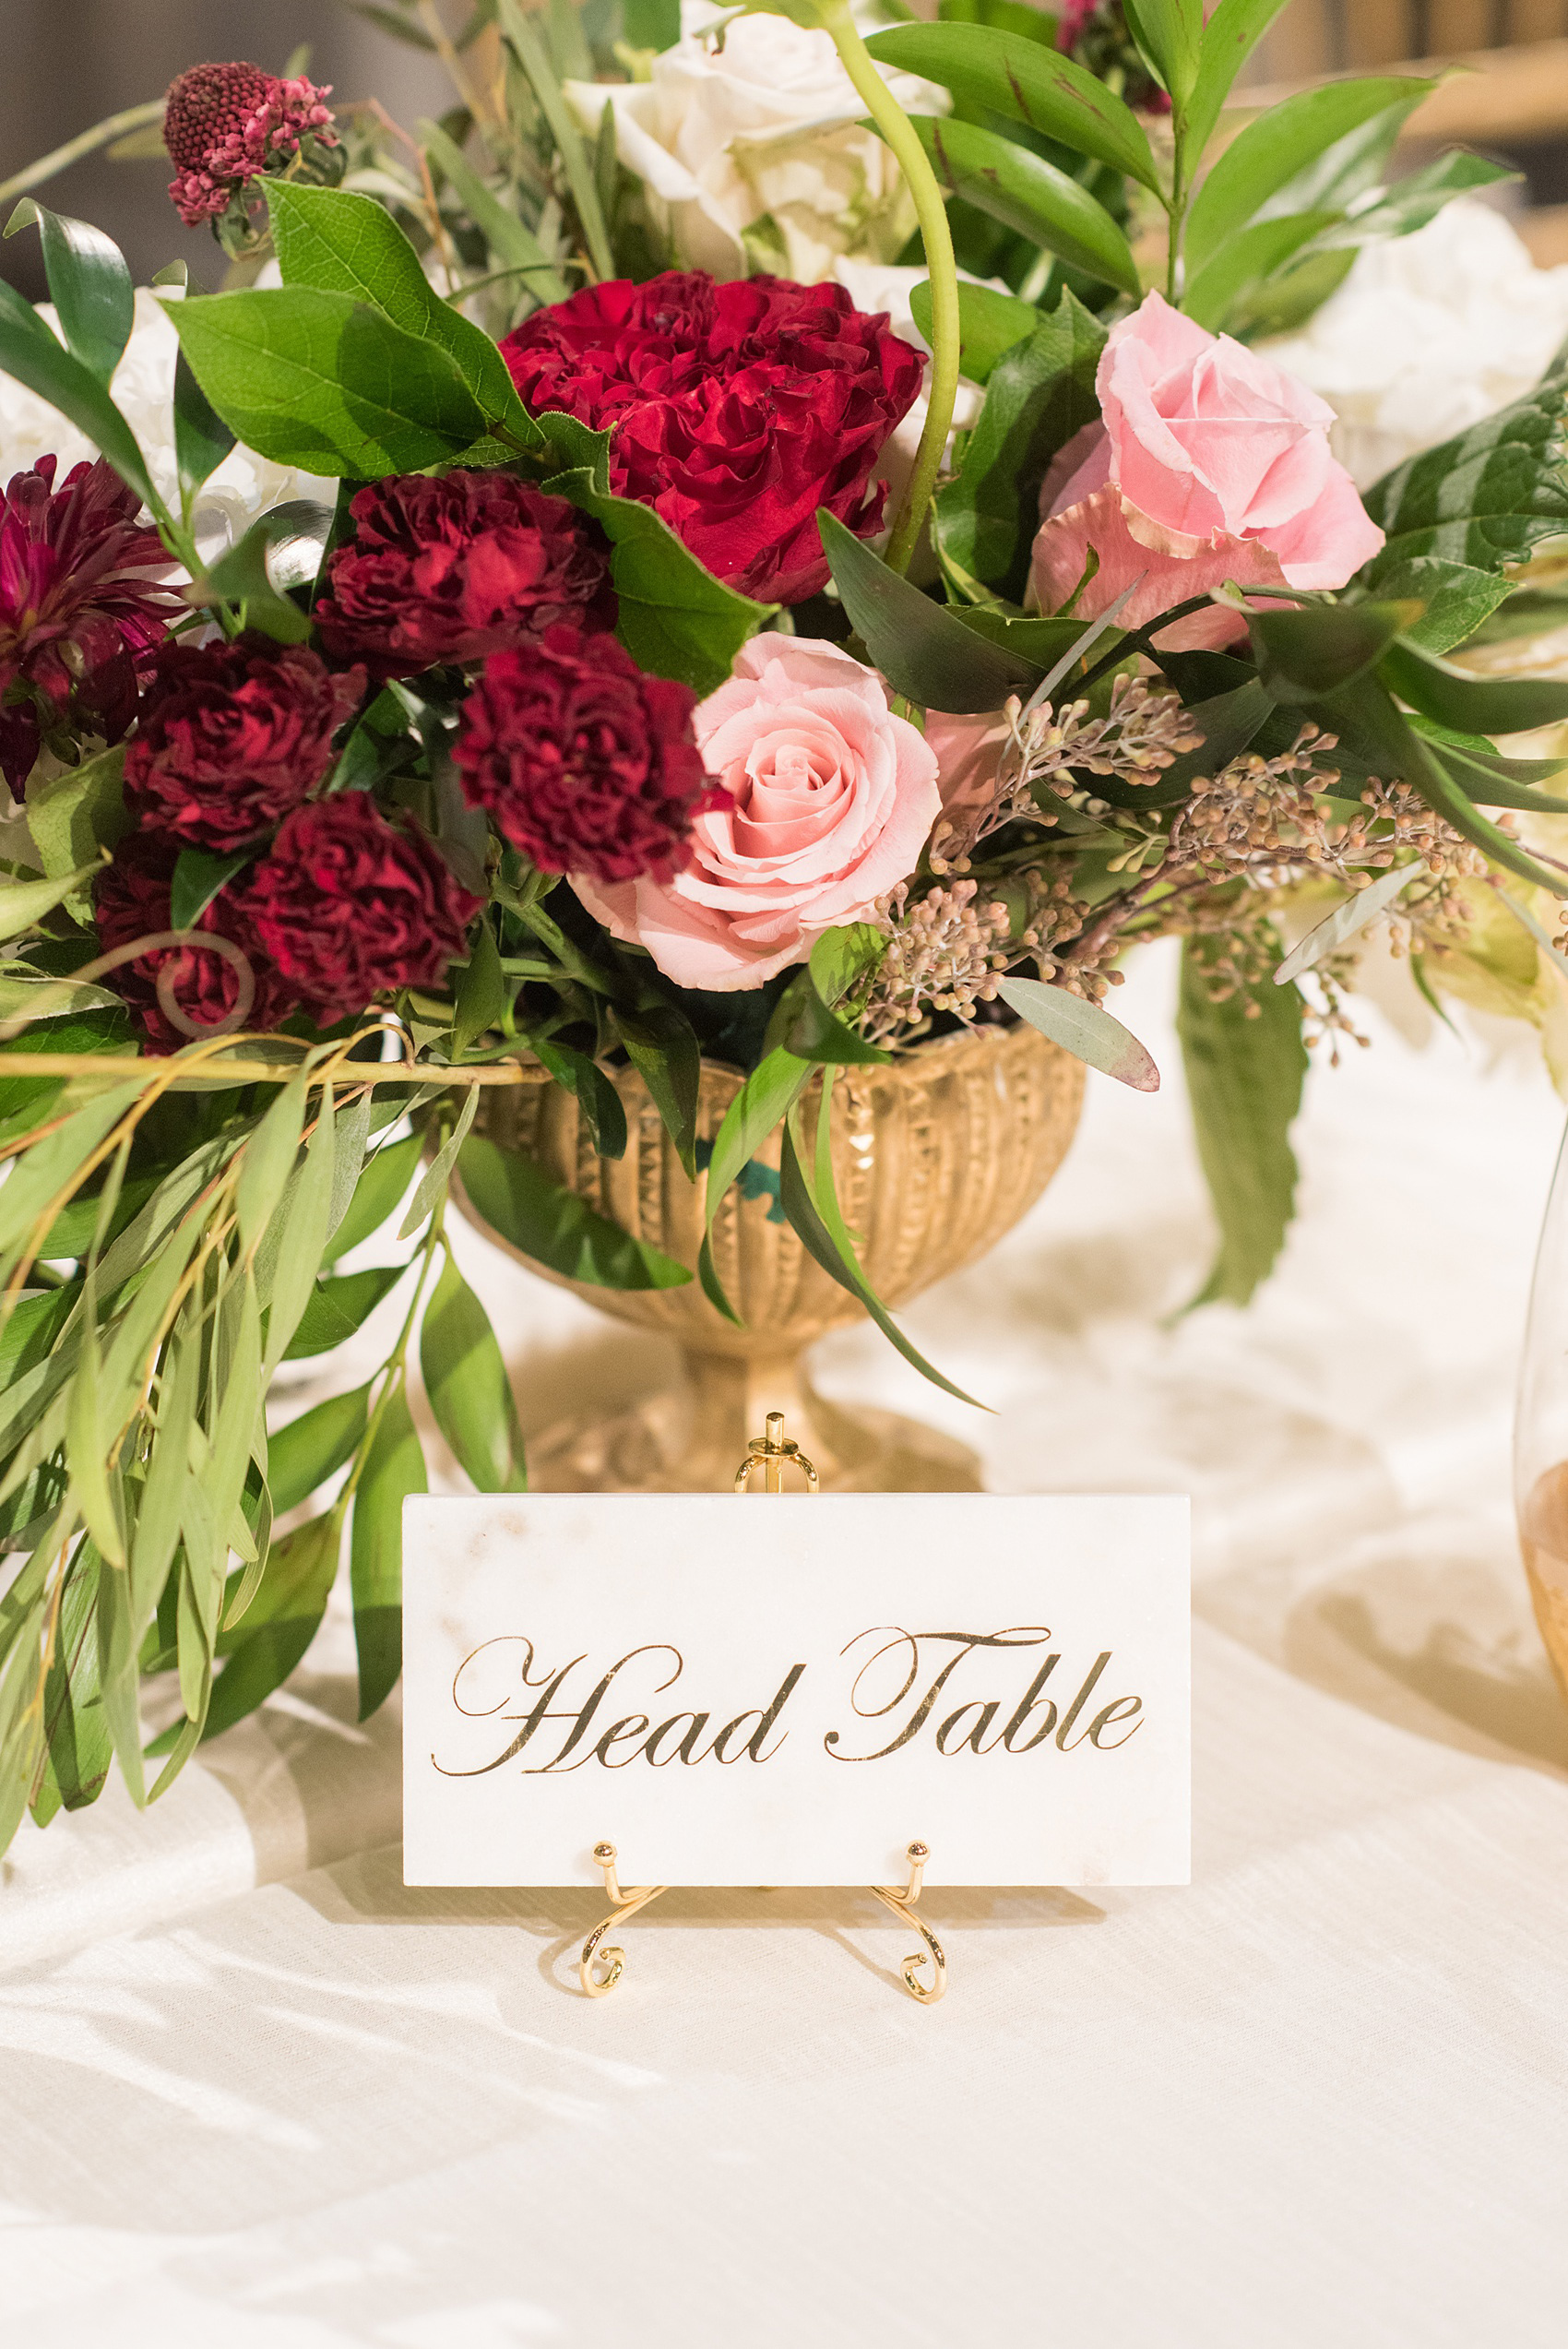 A fall wedding with burgundy, dusty rose and grey details. Mikkel Paige Photography, photographer in Greenville NC and Raleigh, captured this wedding at Rock Springs Center, planned by @vivalevent. The tables had marble tiles that showed table numbers in gold script. Click through for more details and pictures from their day! #mikkelpaige NCwedding #northcarolinawedding #southernwedding #tablenumbers